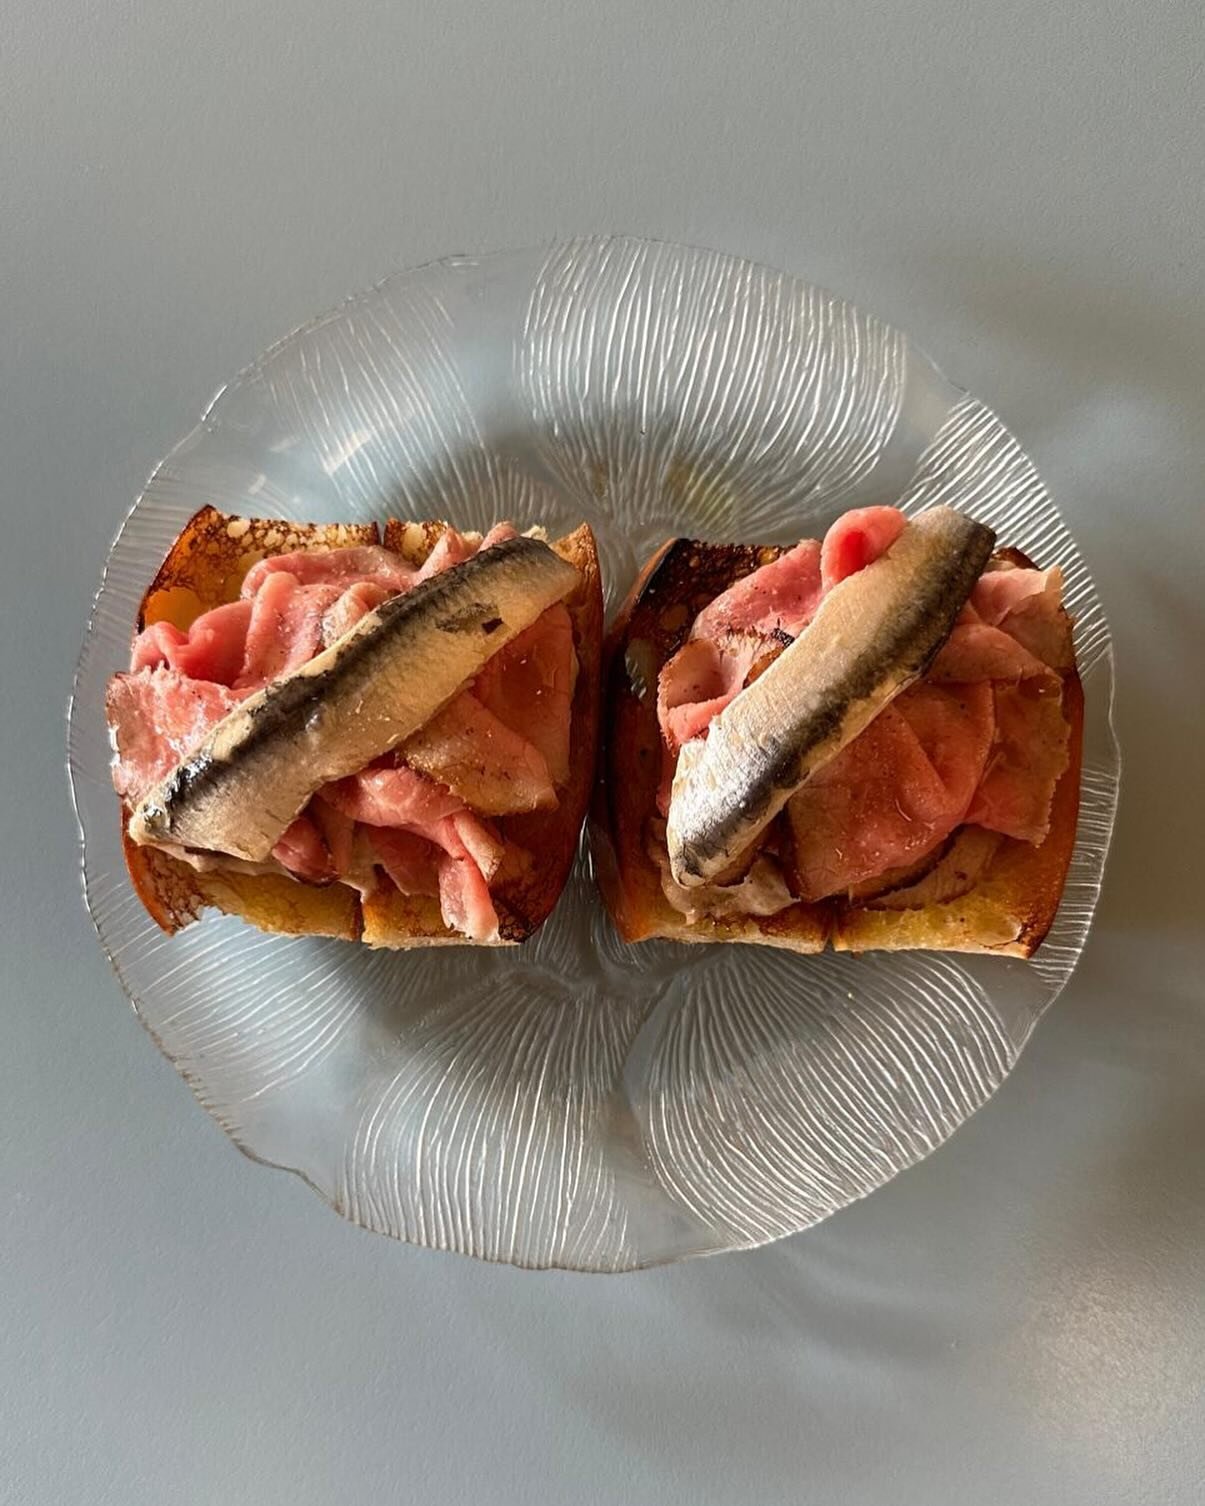 Don&rsquo;t miss out on this one. Vitello tonnato toast! On the menu tonight until sold out.

WA girello, white ortiz anchovy, local yellowfin tuna mayo.